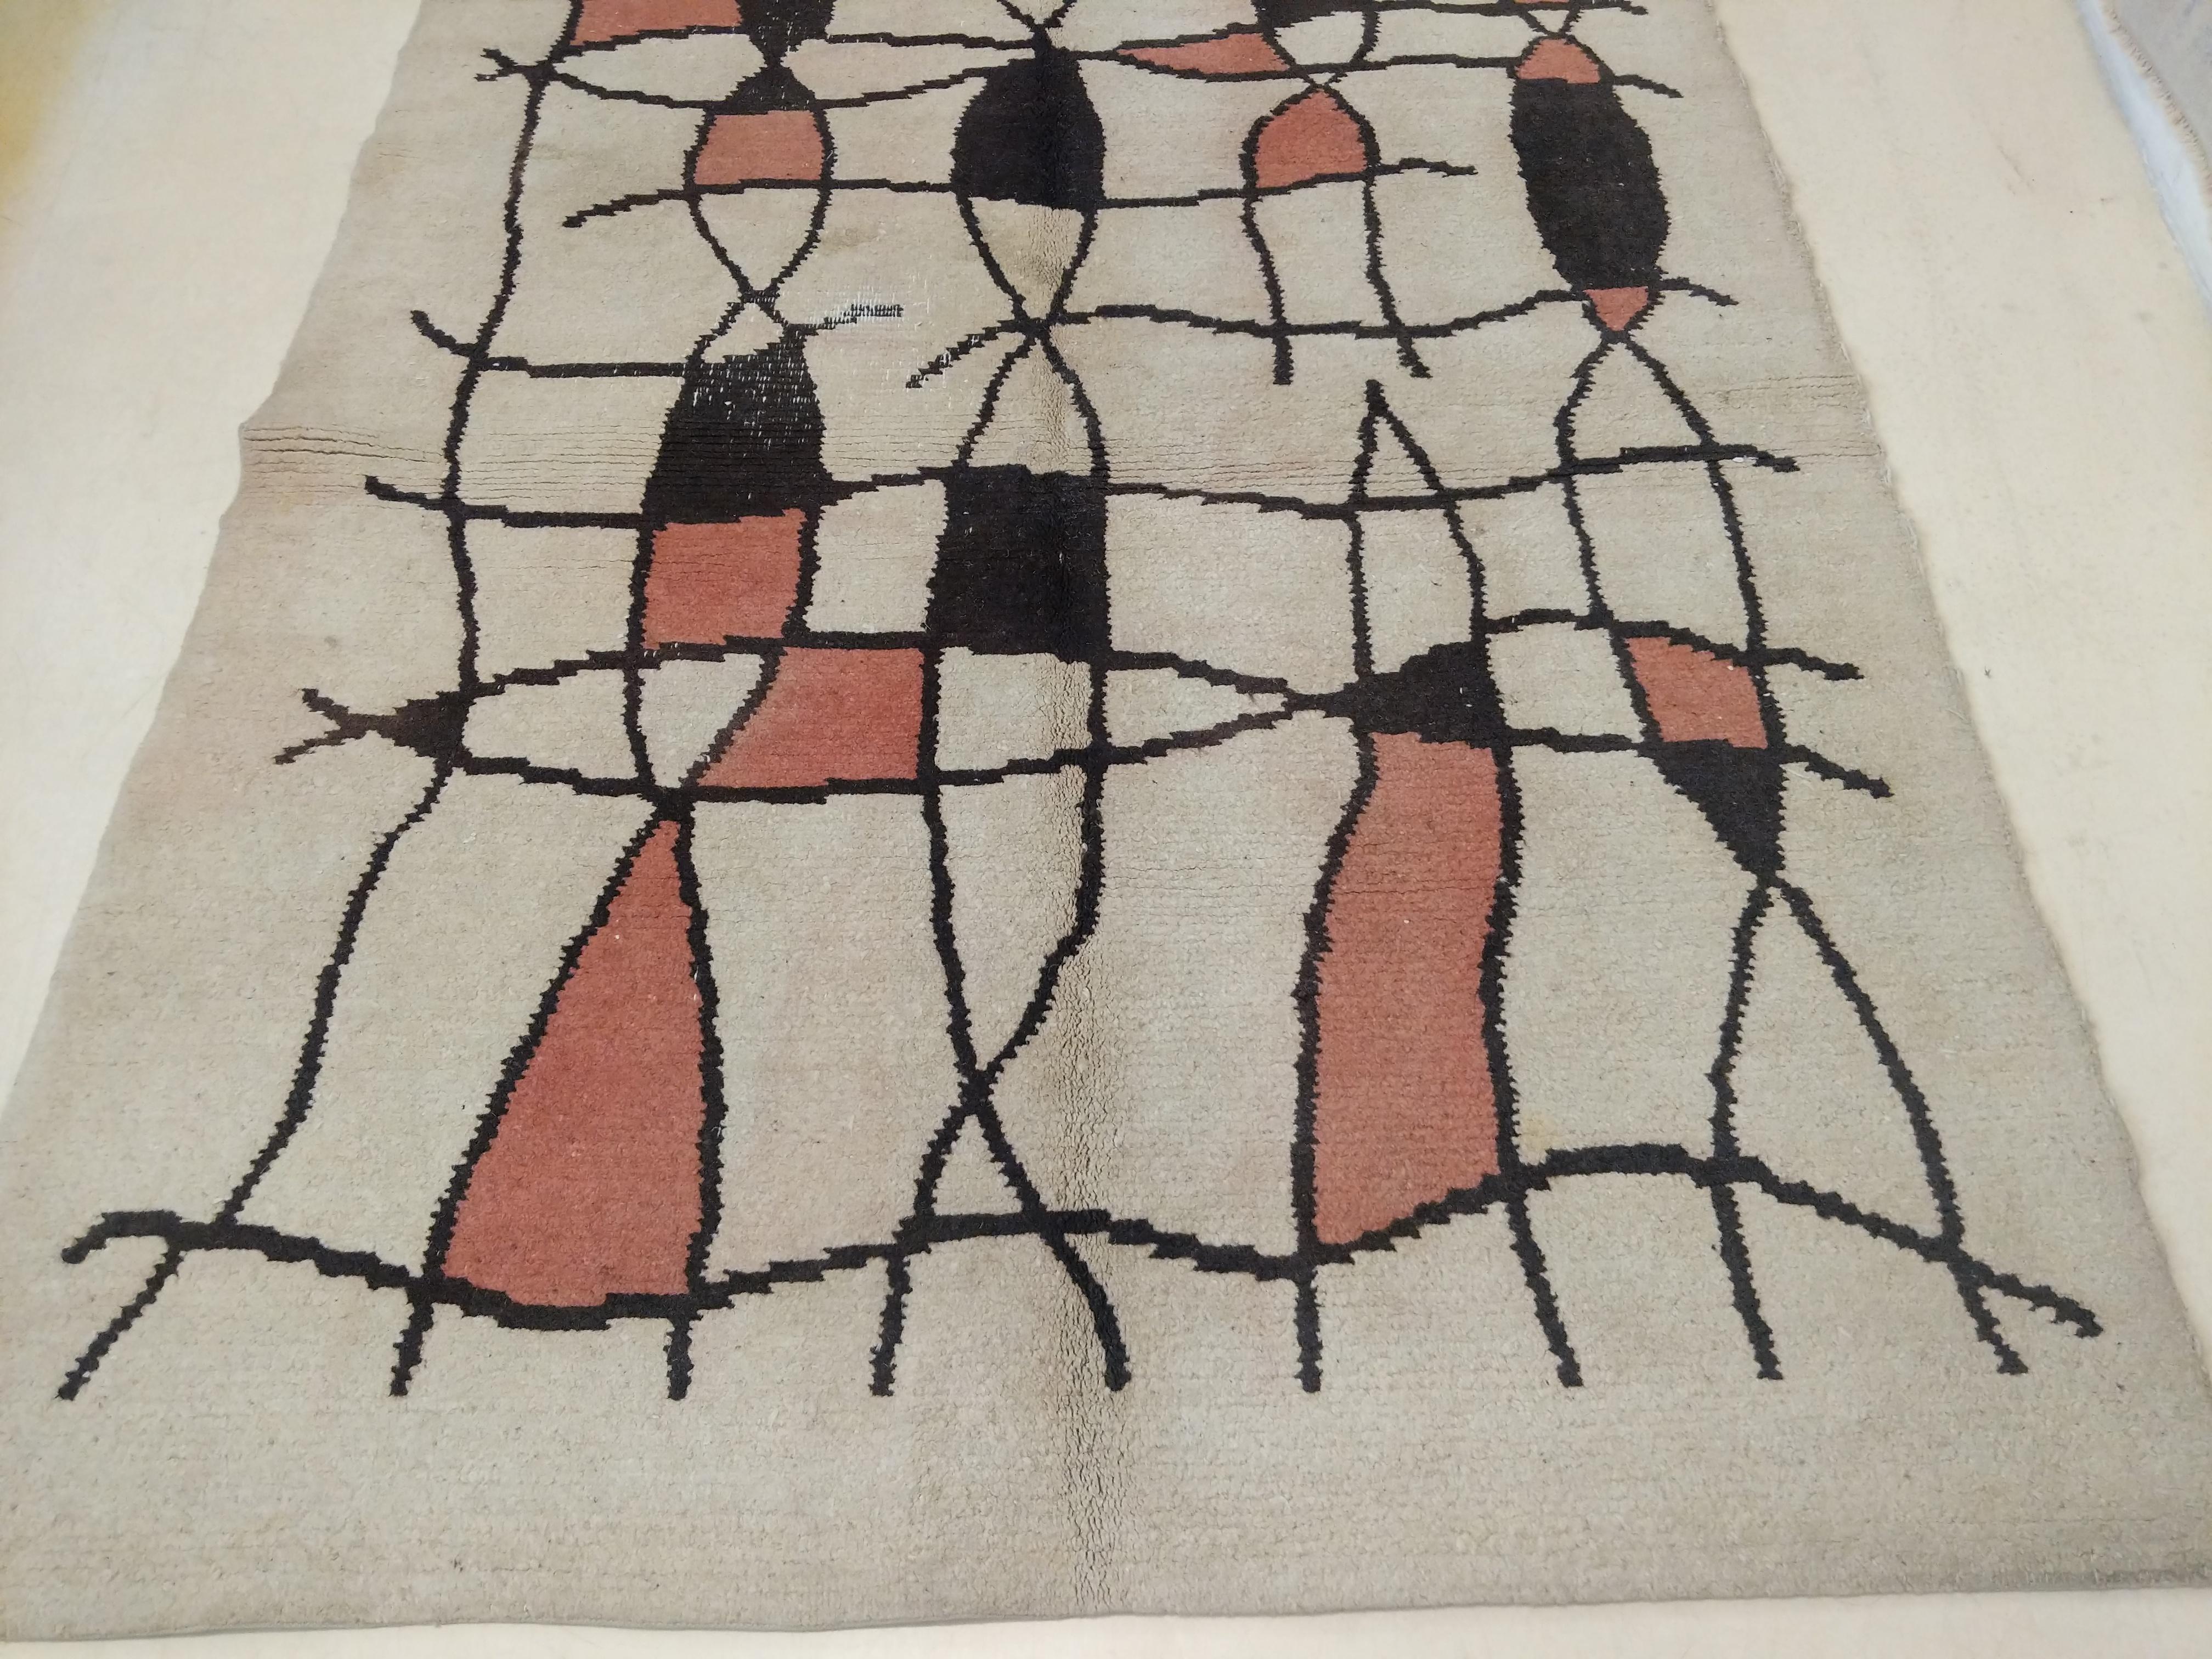 A rare and unusual French Art Deco rug distinguished by an abstract grid pattern over an ivory background. Rugs of this period were quite strongly influenced by the artistic avant-garde movements that were happening in Paris, as there was a strong